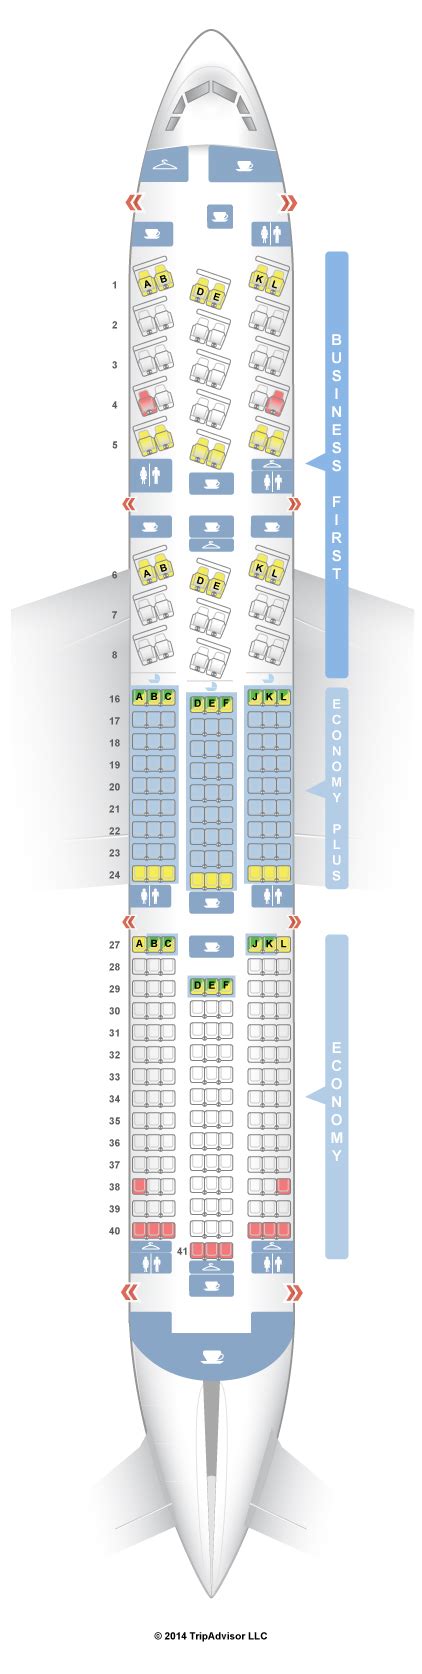 Aa 787 9 Seat Map Maps For You